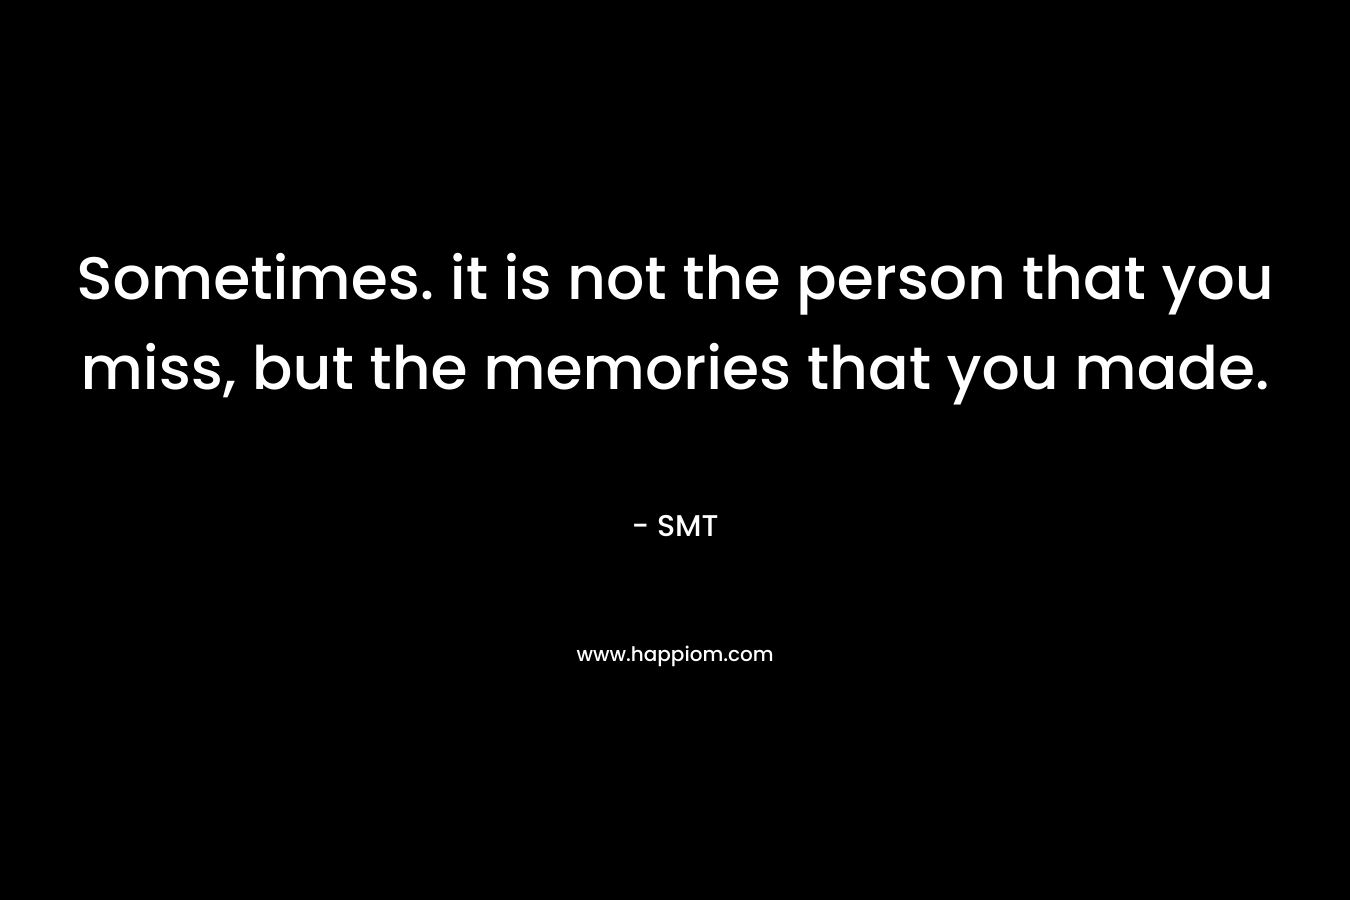 Sometimes. it is not the person that you miss, but the memories that you made.